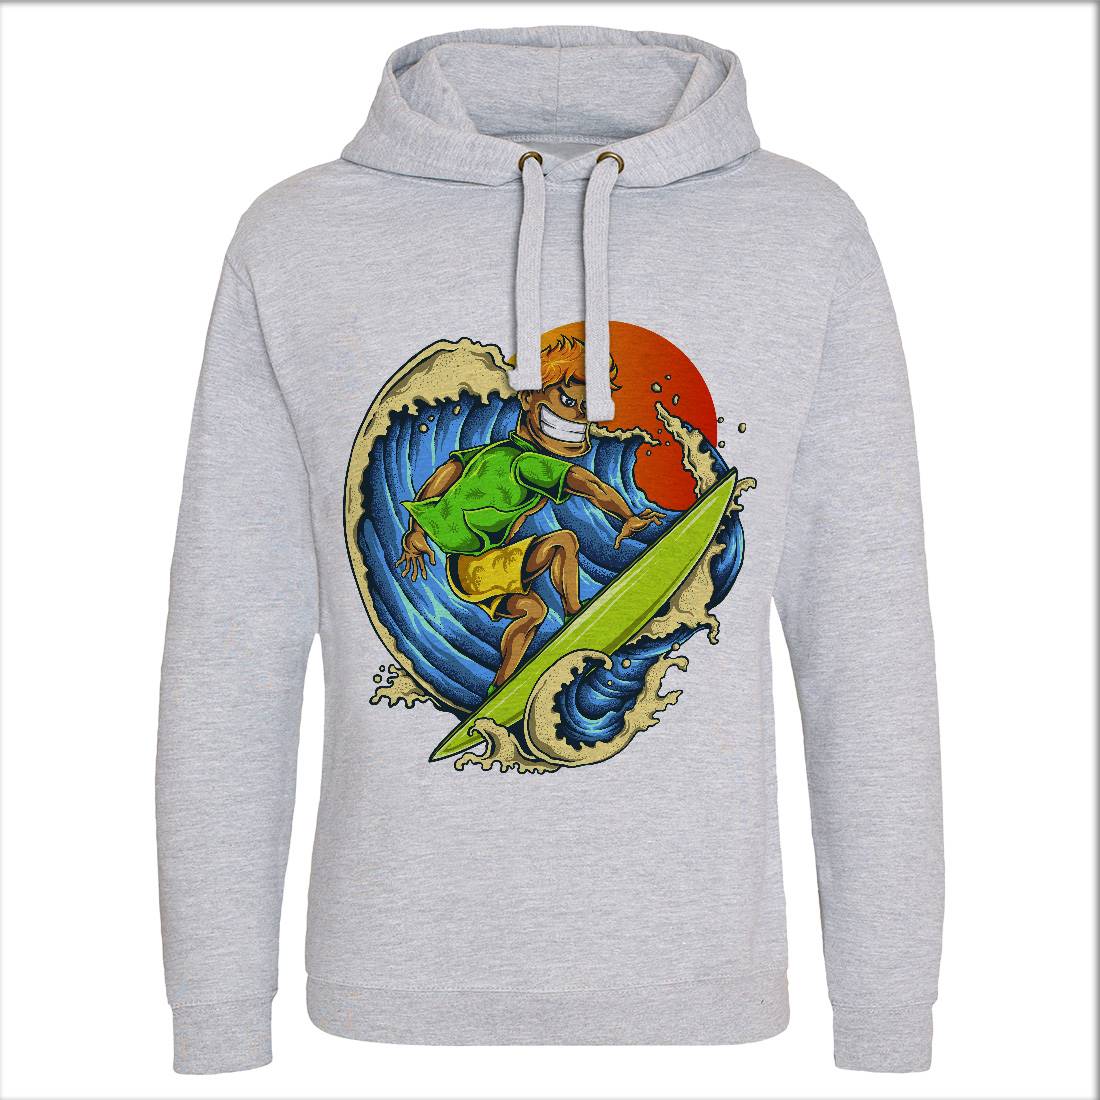 Pro Surfer Mens Hoodie Without Pocket Surf A454